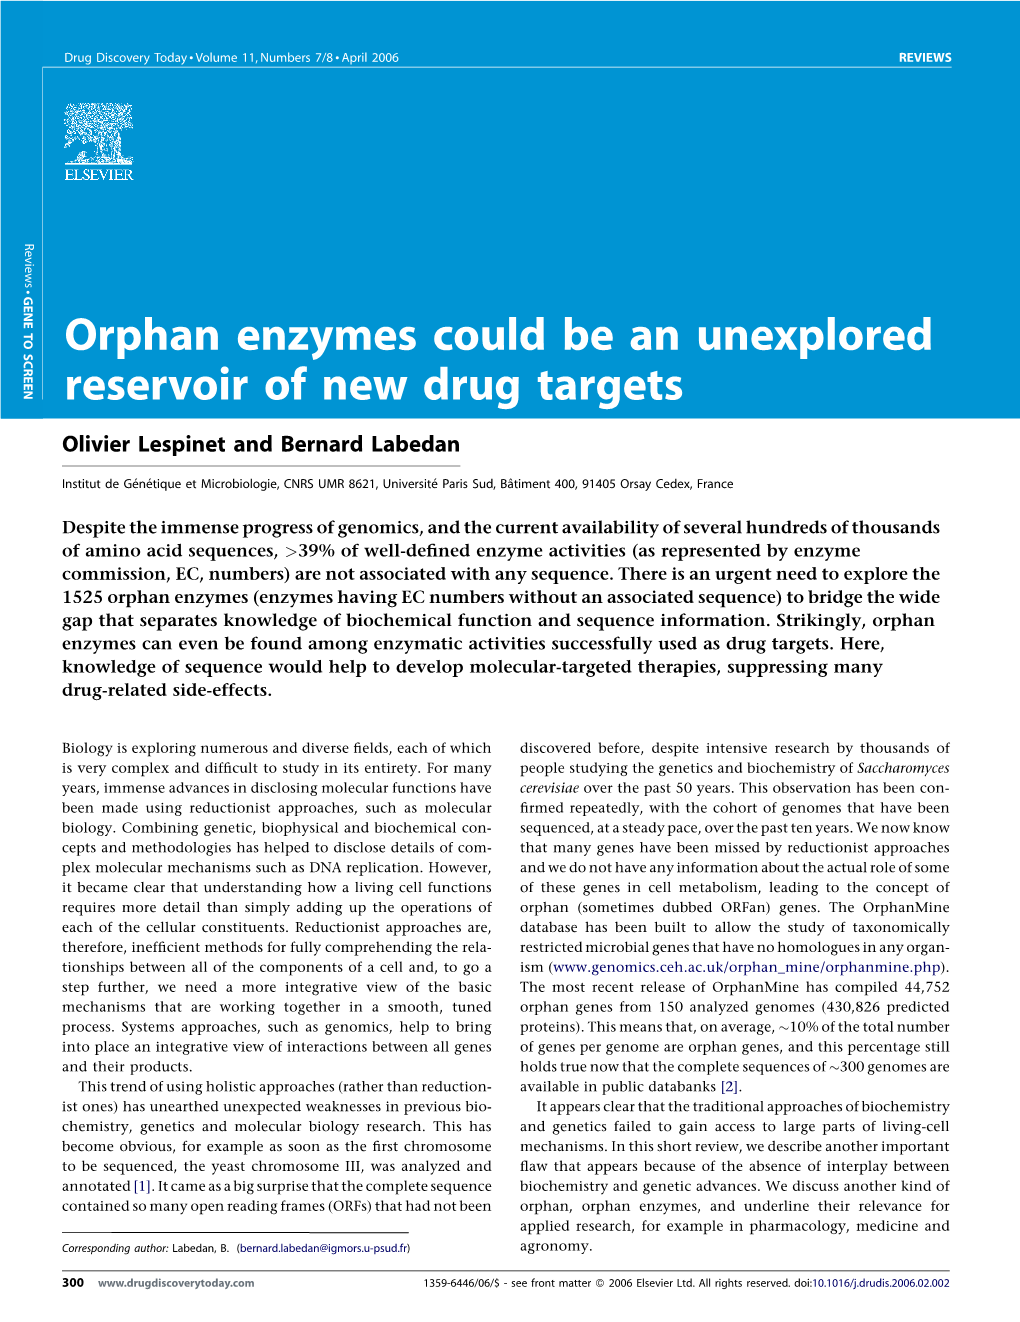 Orphan Enzymes Could Be an Unexplored Reservoir of New Drug Targets